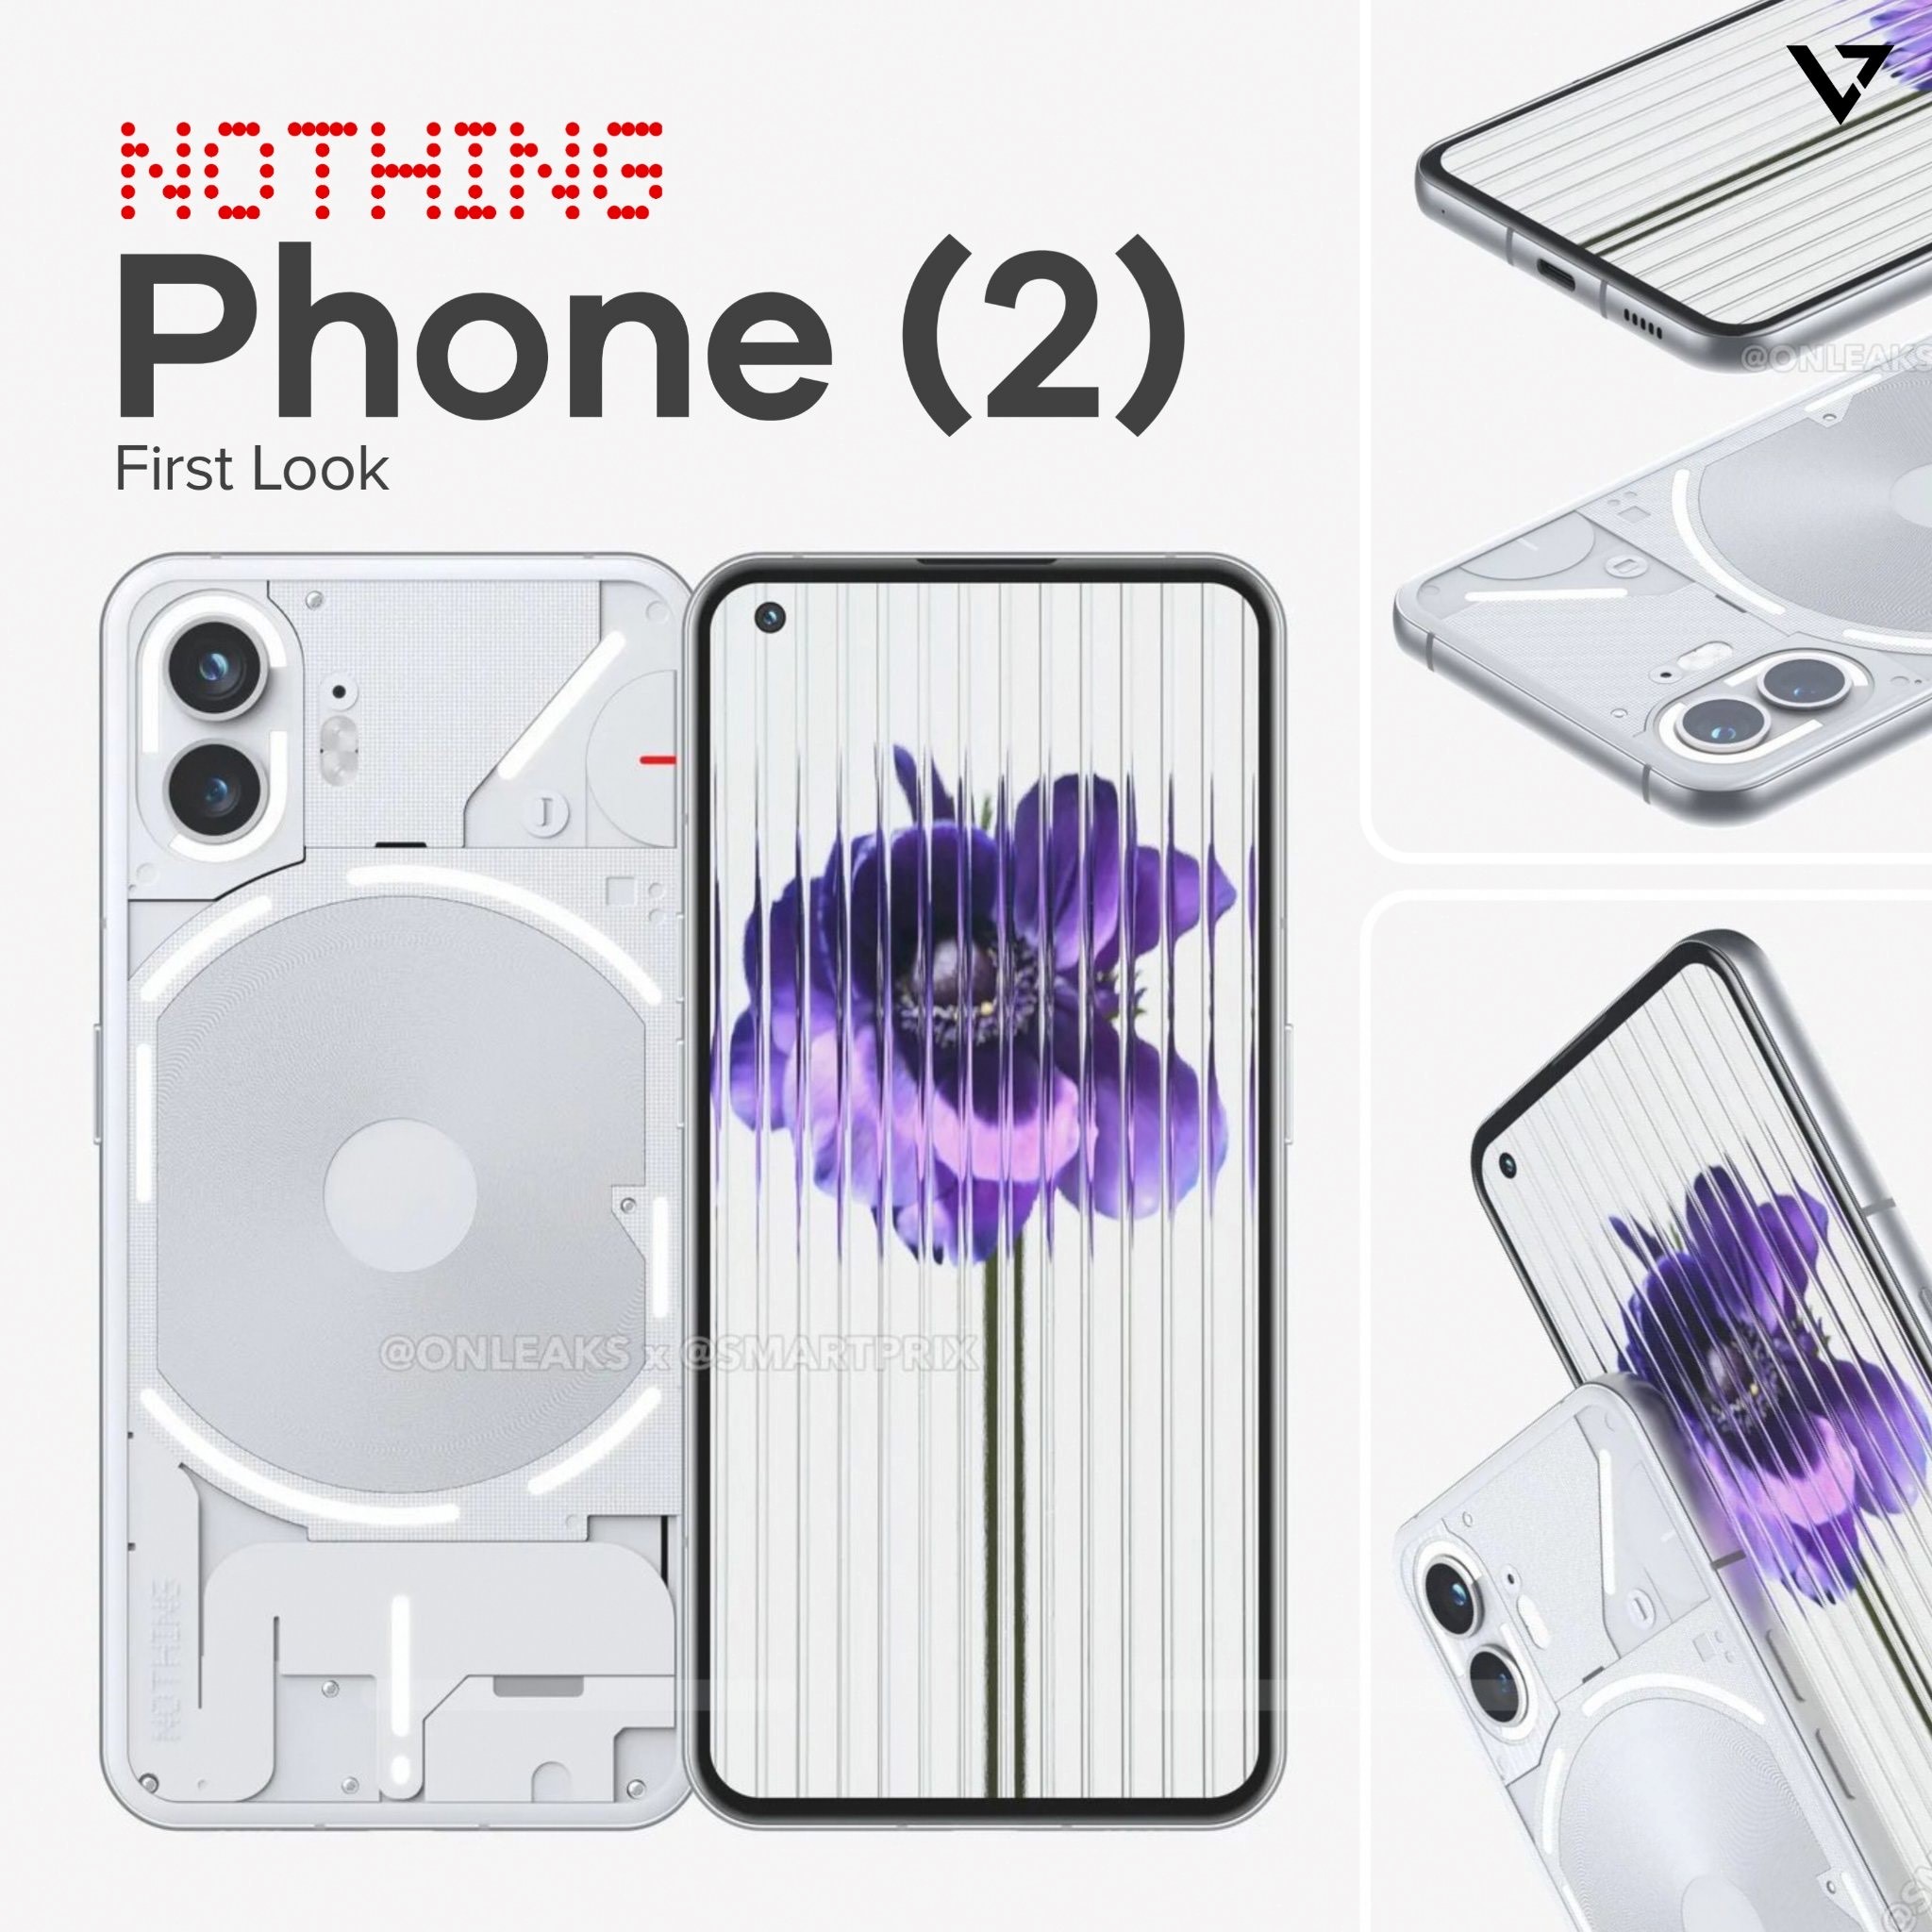 Nothing's Carl Pei Replies to Memes on Phone 2 Design, Says “Just Wait and  See”; Suggests Entirely New Nothing Phone (2) design through Meme Before  Official Launch